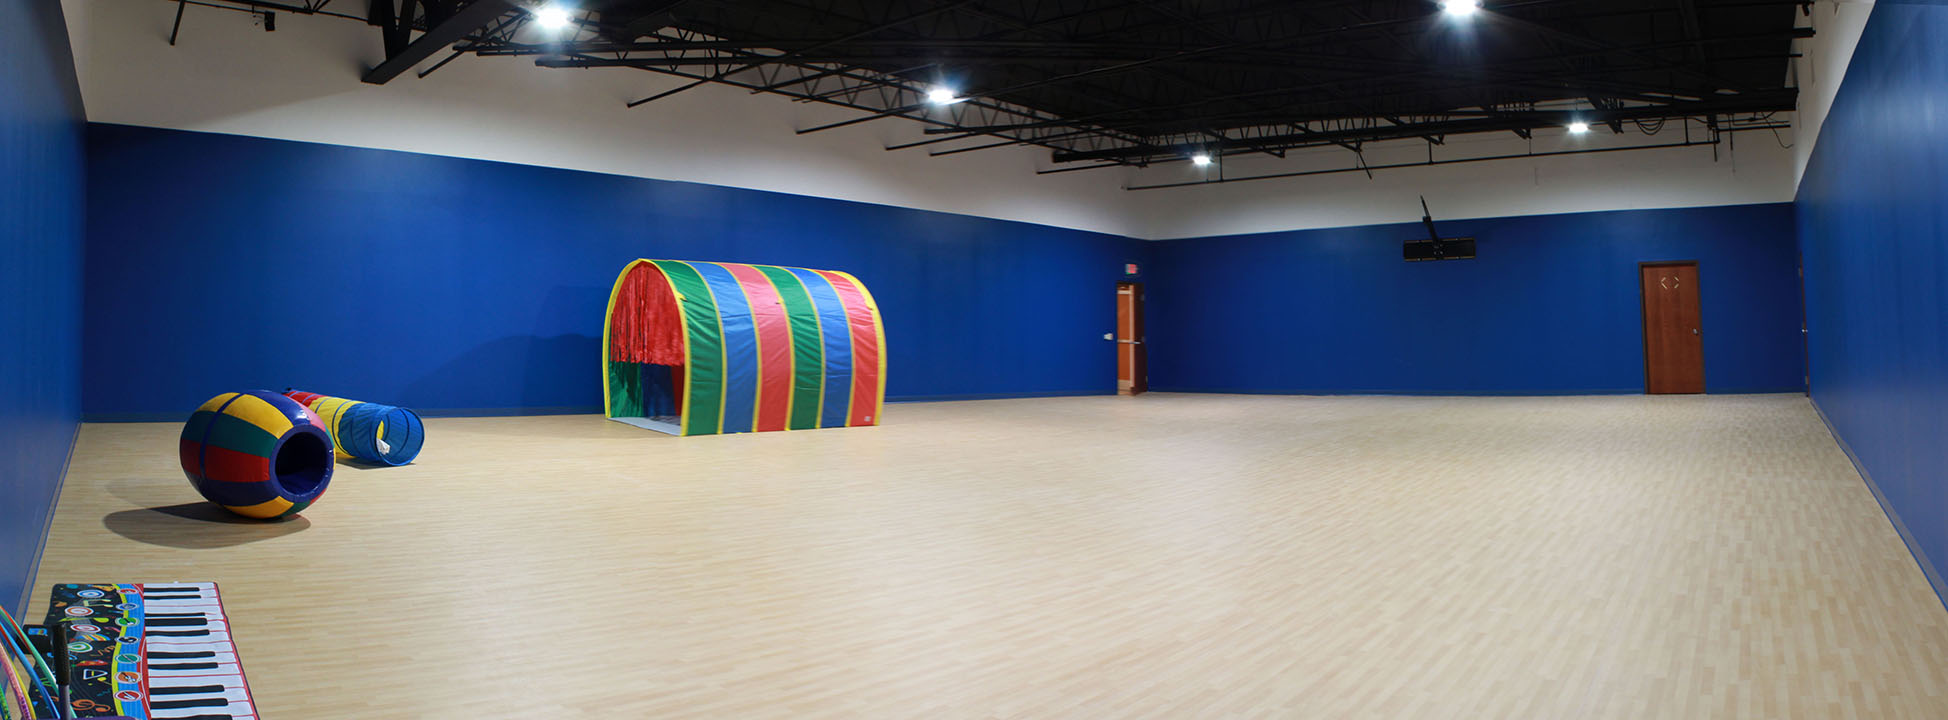 Gymnasium Bright but deep blue walls, high, lofty ceiling with exposed piping, light wood floor, bright toys scattered. 